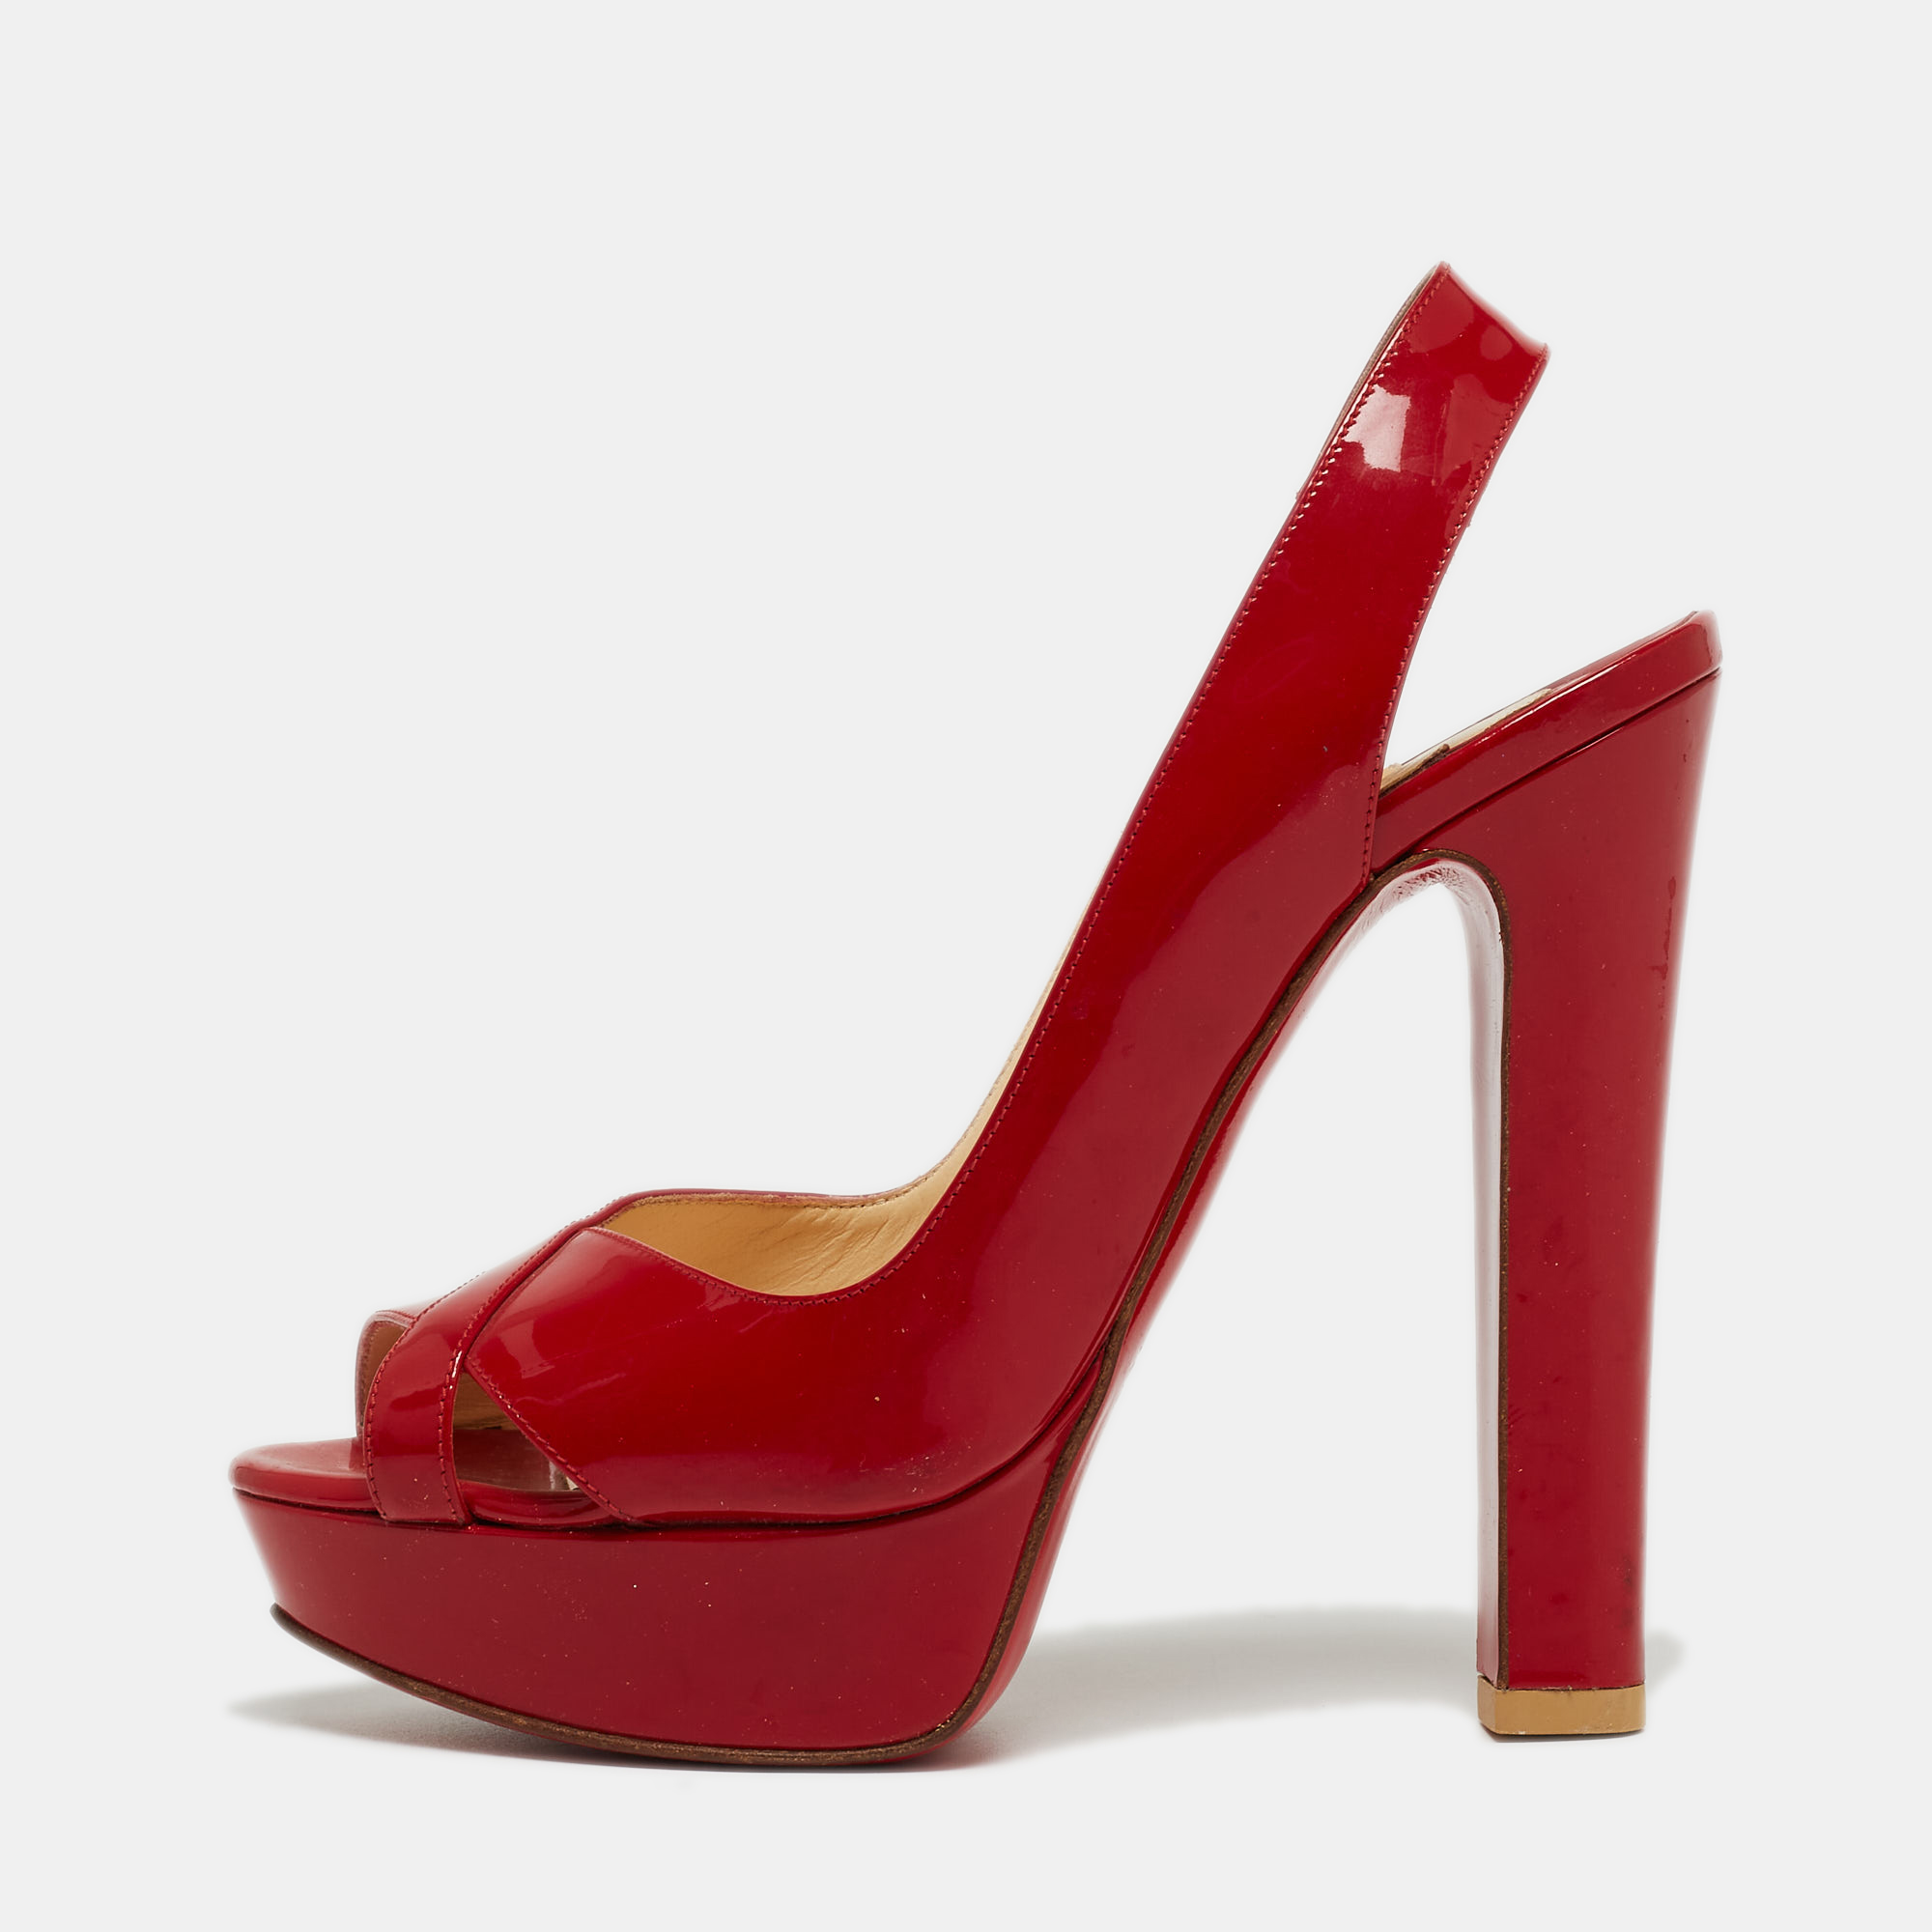 Pre-owned Christian Louboutin Red Patent Leather Marpoil Peep Toe Platform Slingback Sandals Size 37.5